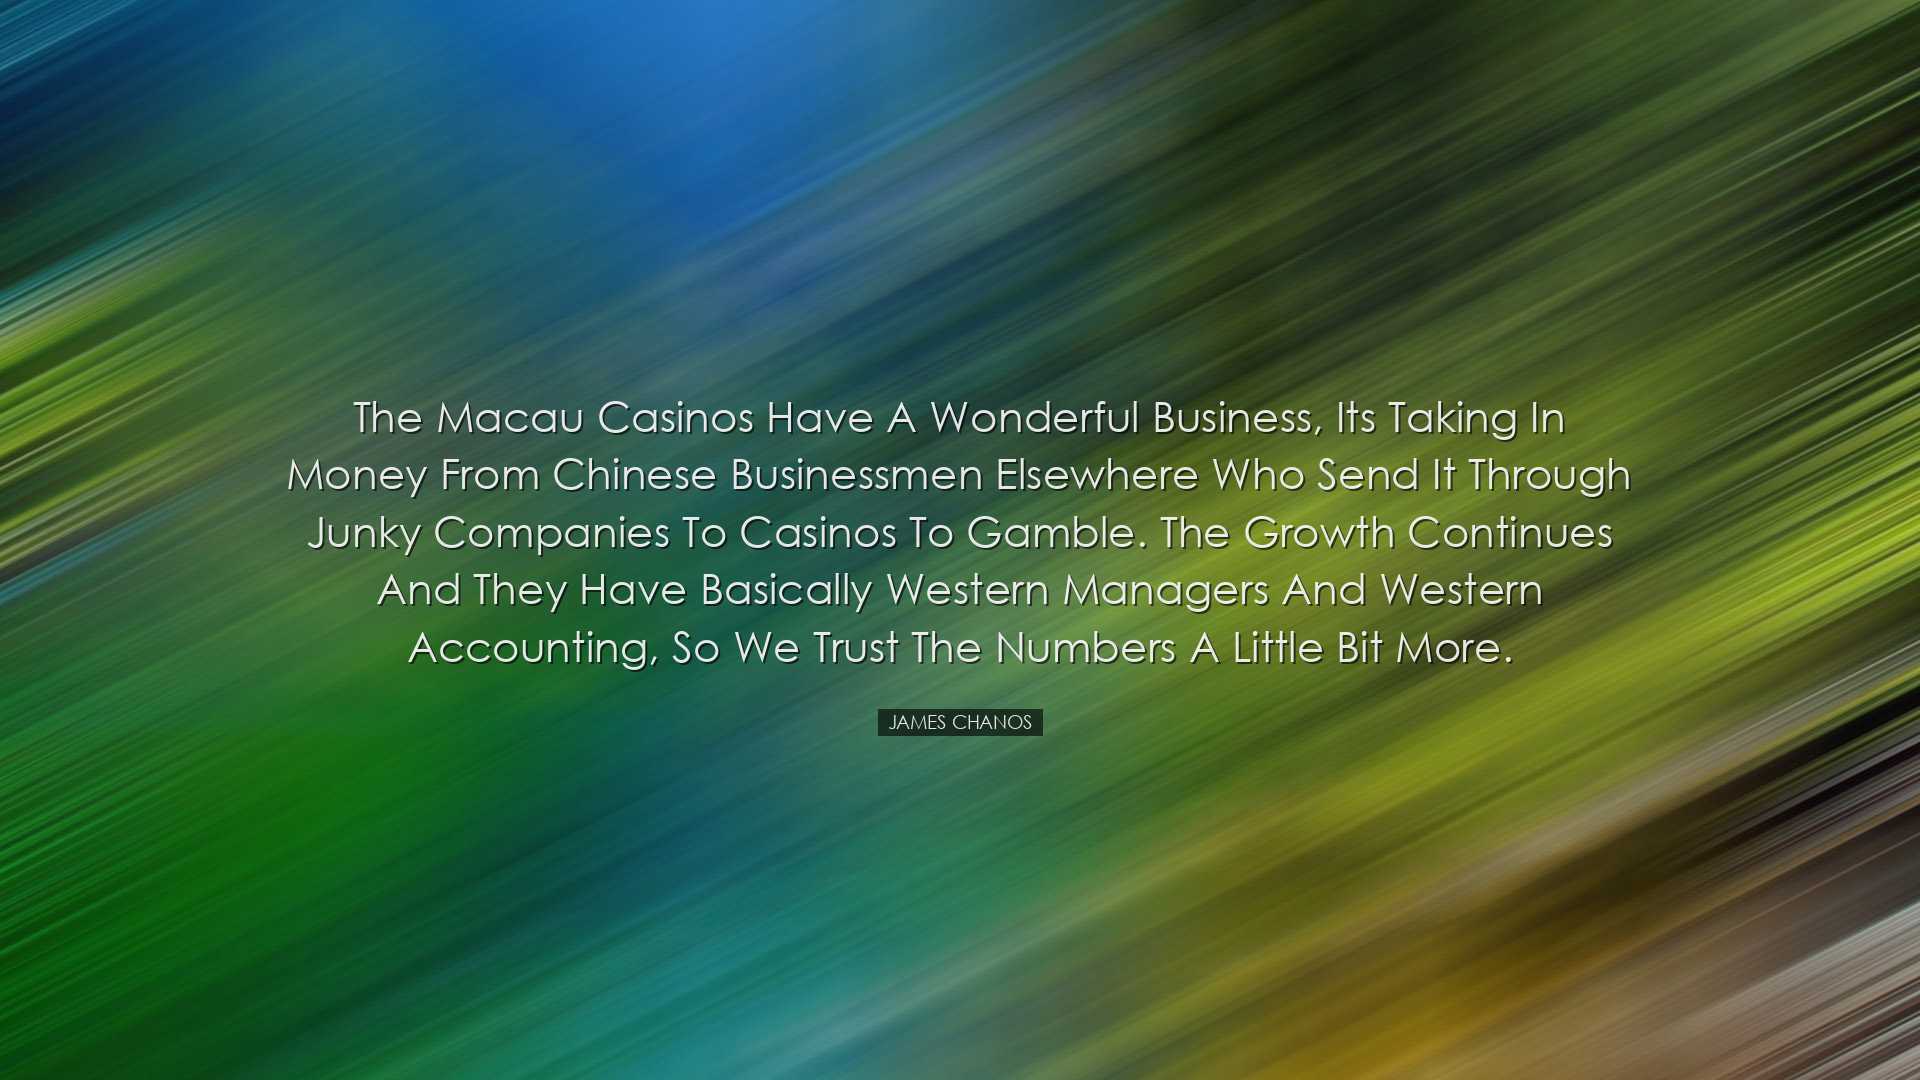 The Macau casinos have a wonderful business, its taking in money f